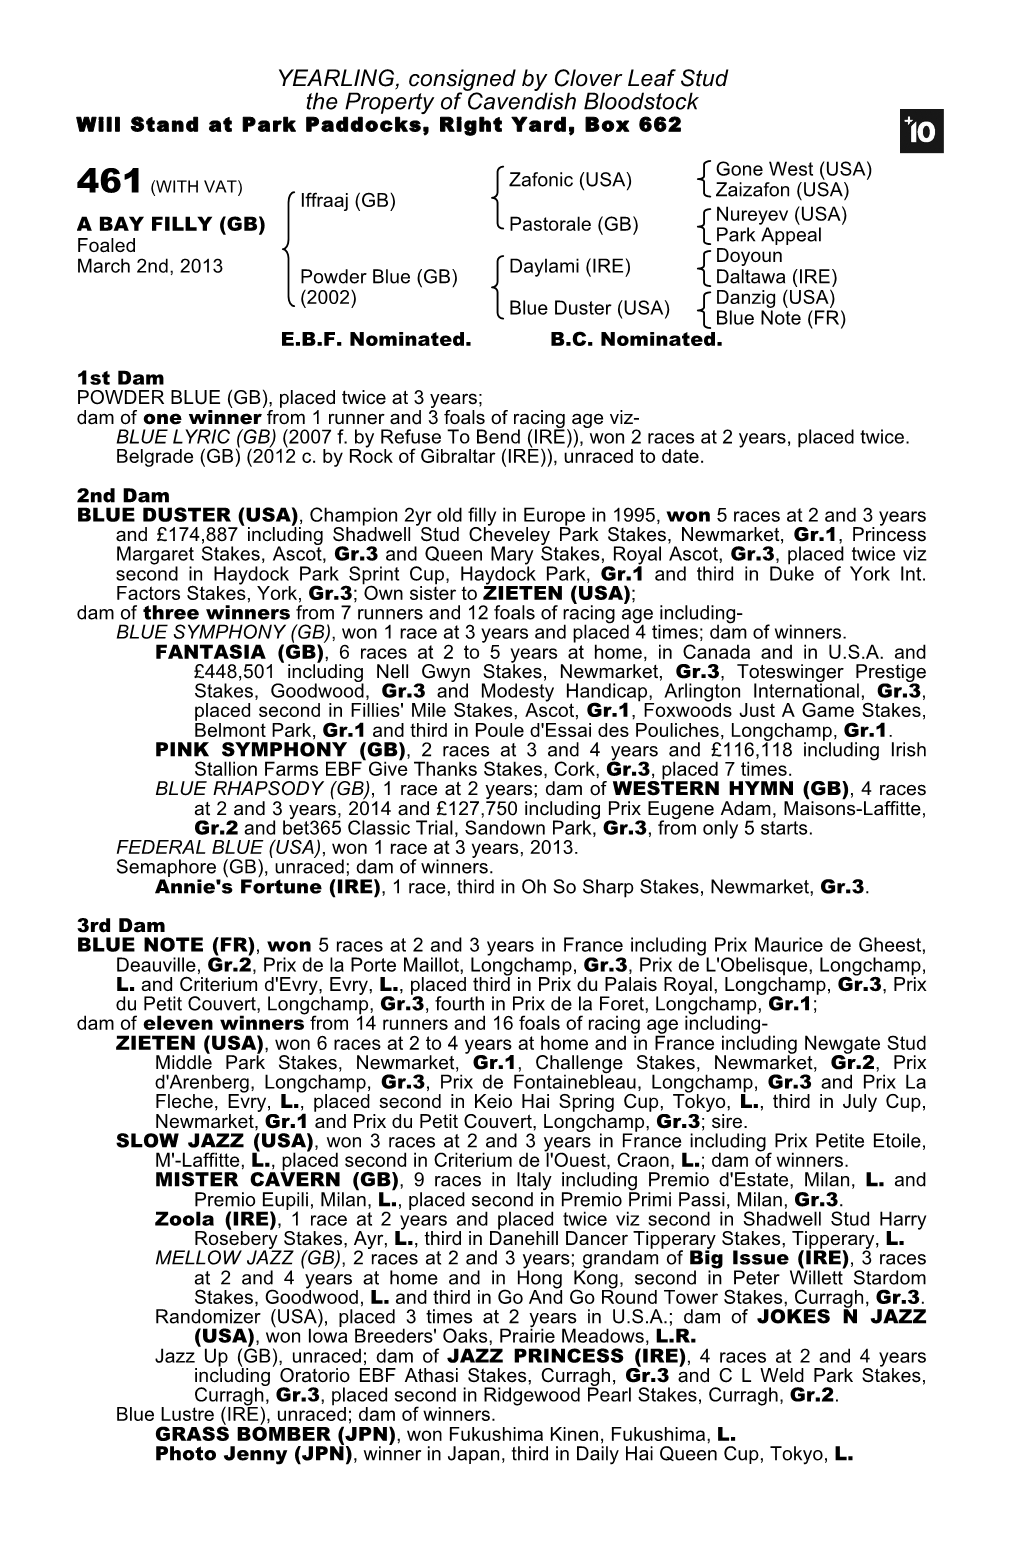 YEARLING, Consigned by Clover Leaf Stud the Property of Cavendish Bloodstock Will Stand at Park Paddocks, Right Yard, Box 662